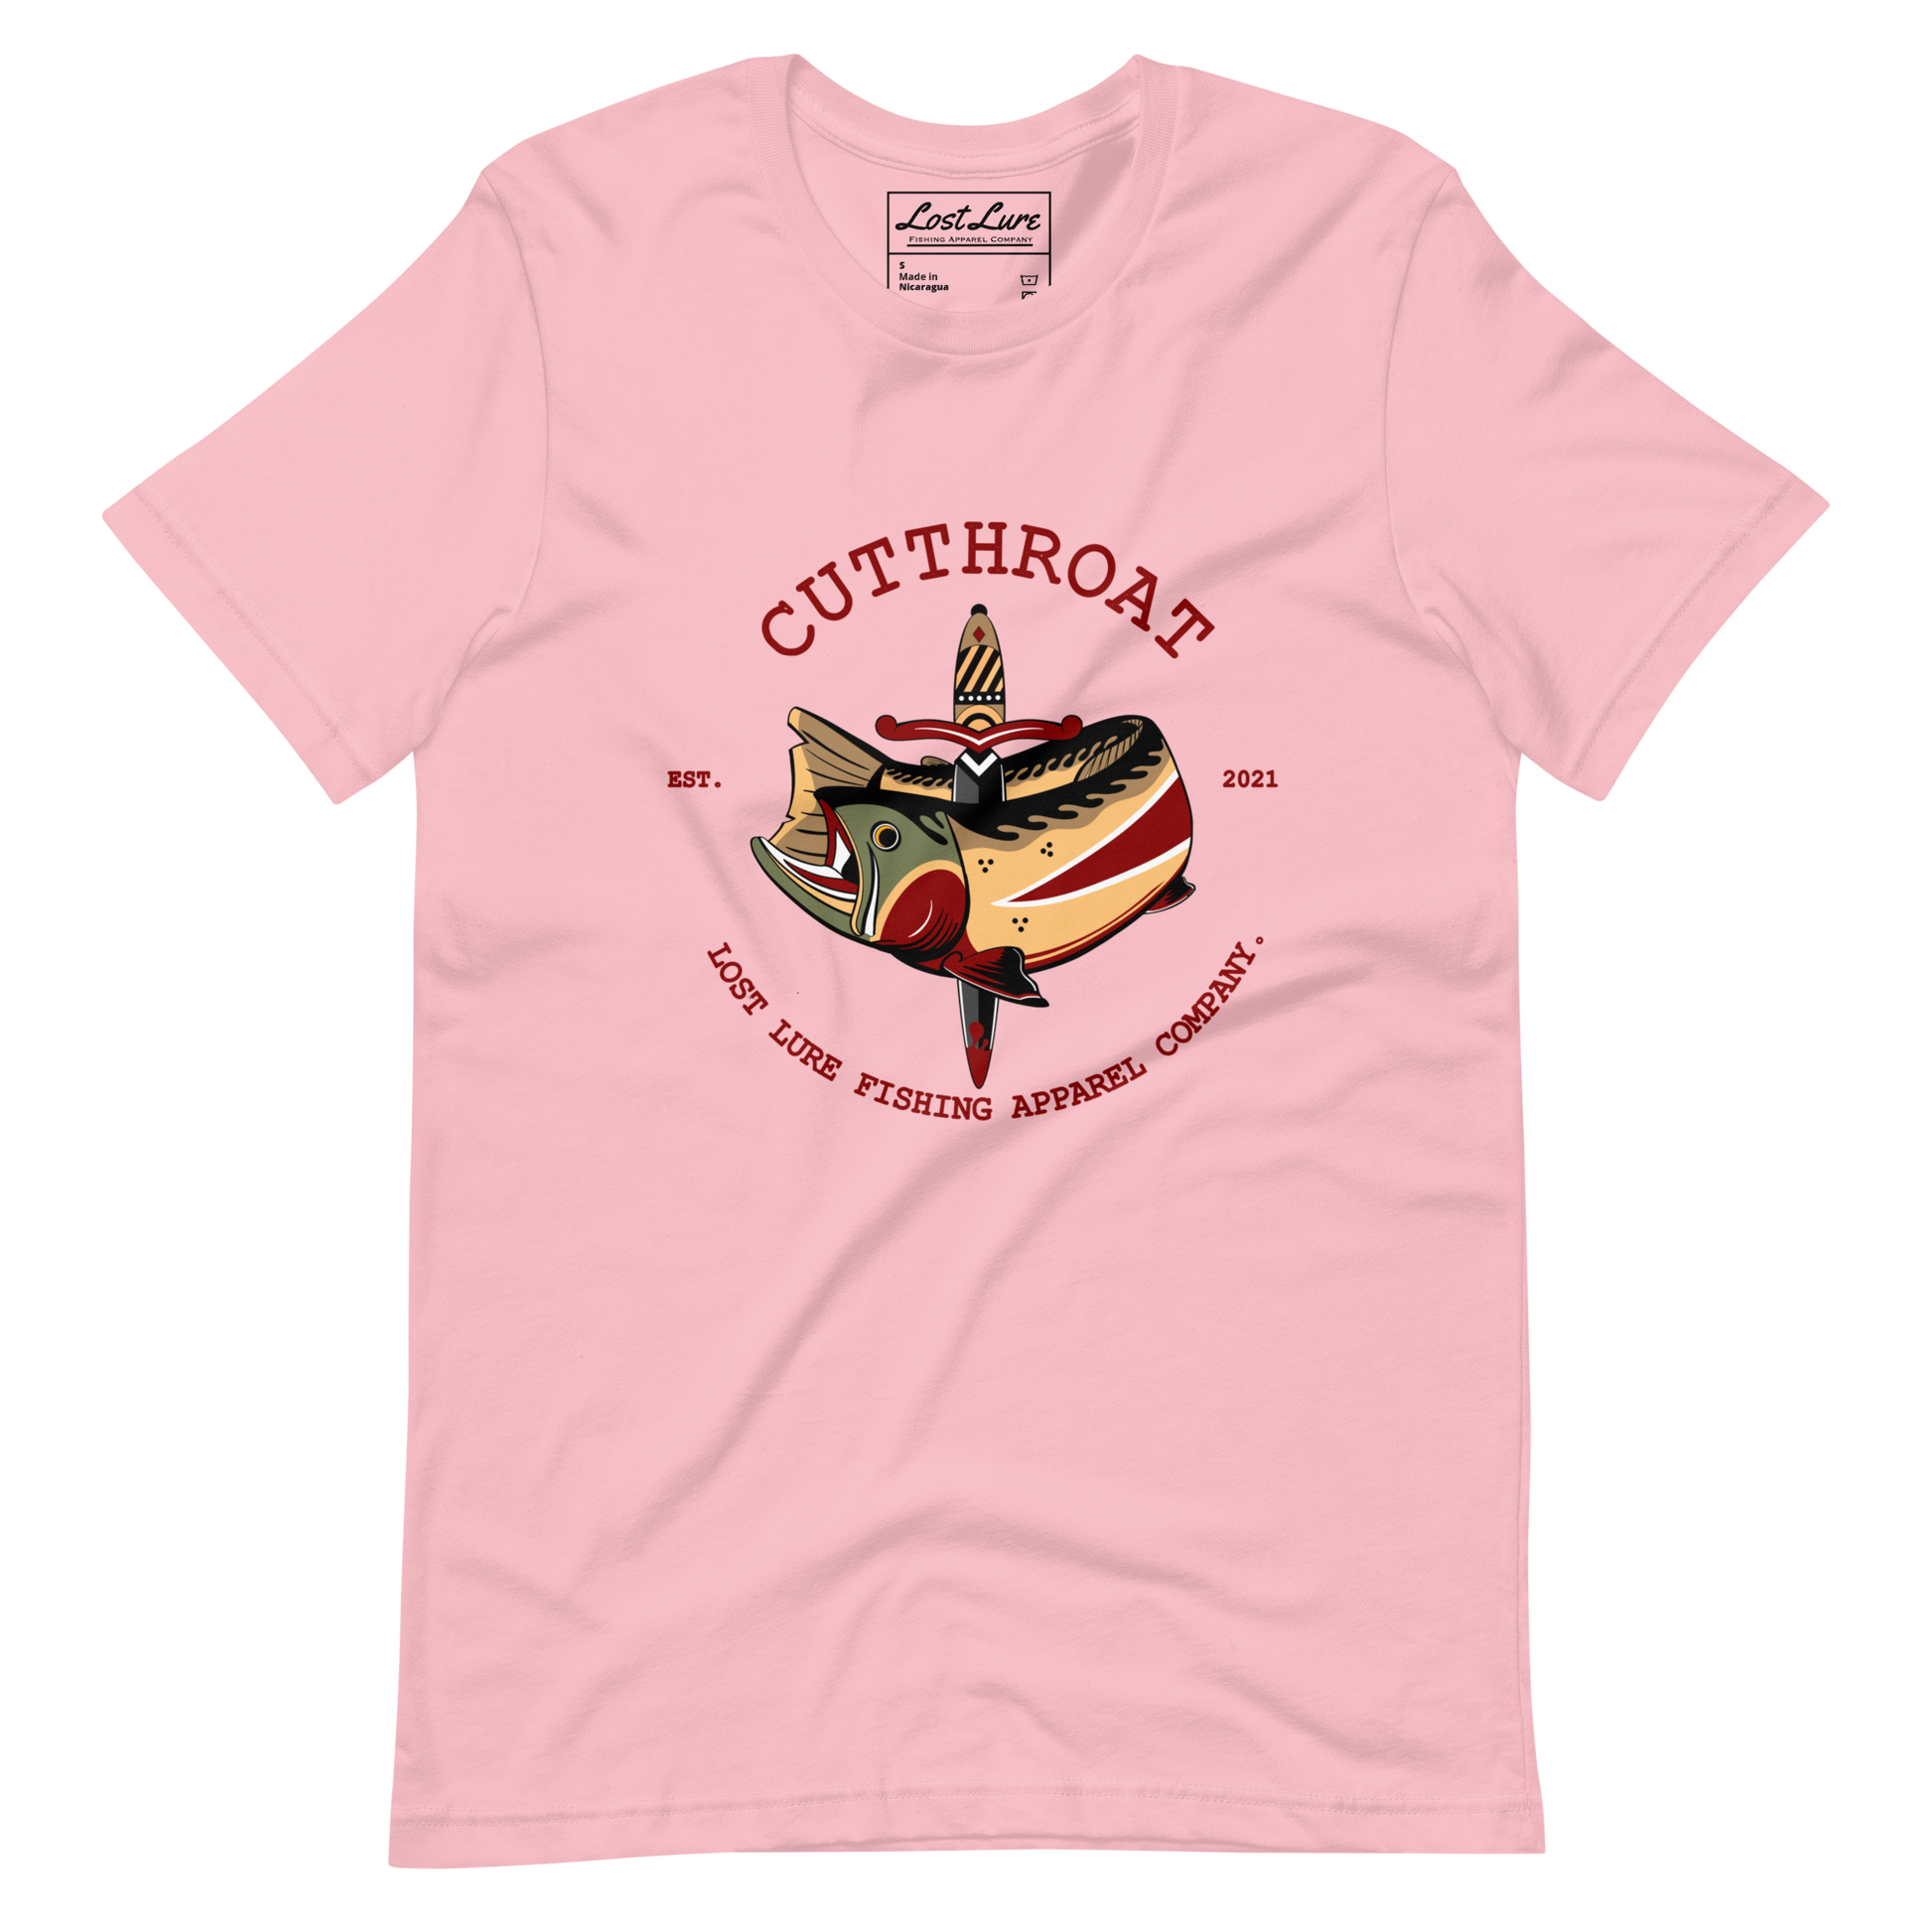 Cutthroat Trout fishing shirt. It’s an American traditional style design with a cutthroat trout and a dagger. The shirt reads Cutthroat trout, est. 2021, lost lure fishing apparel company. The fishing design is on the front of the shirt. Pink fishing shirt 